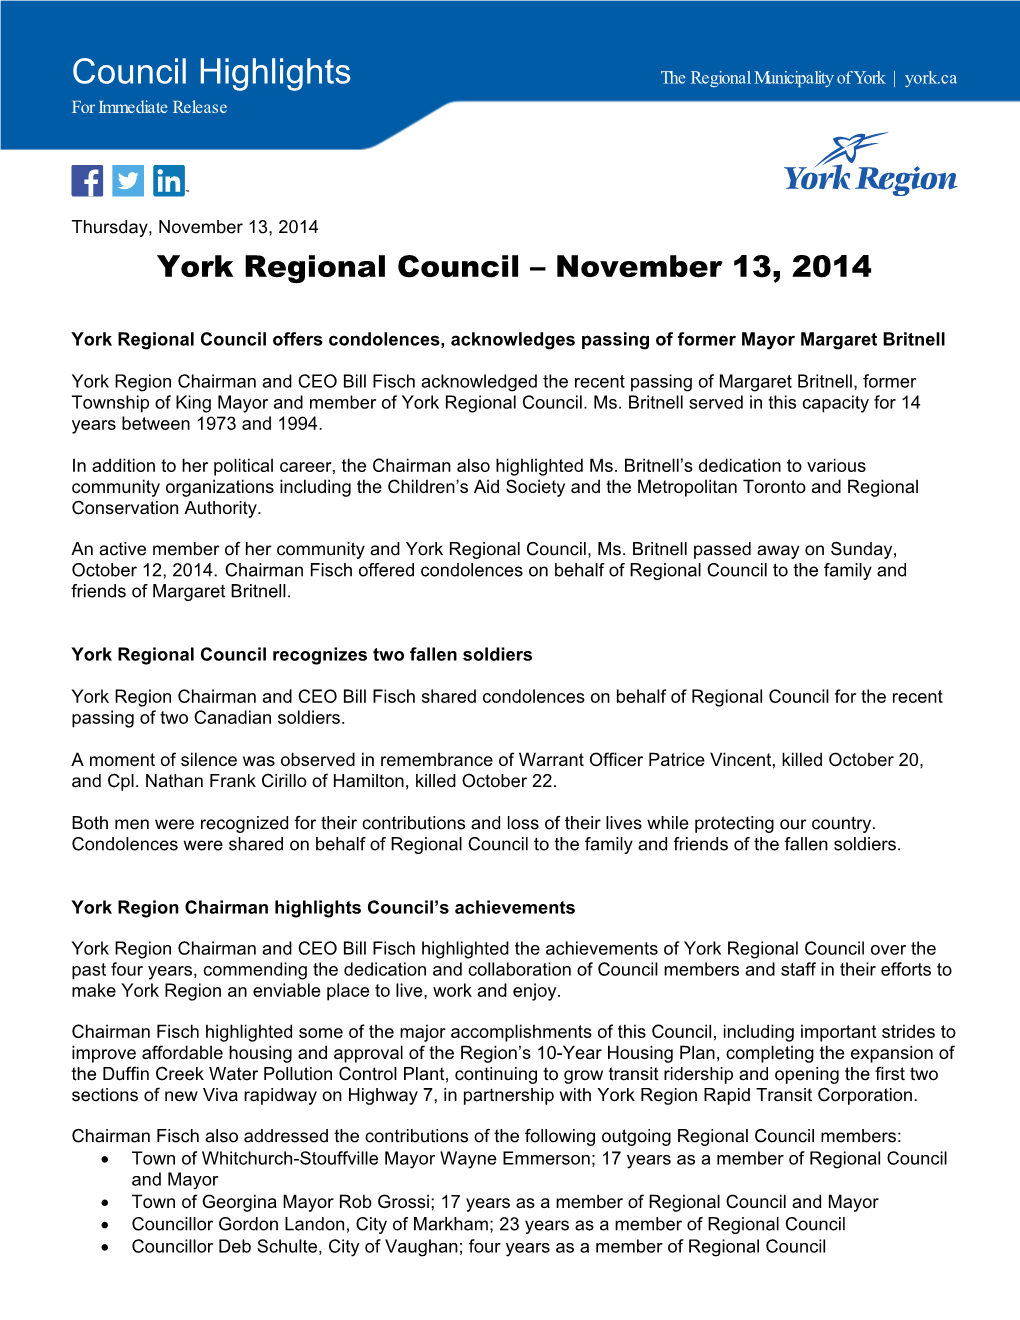 Council Highlights the Regional Municipality of York | York.Ca for Immediate Release